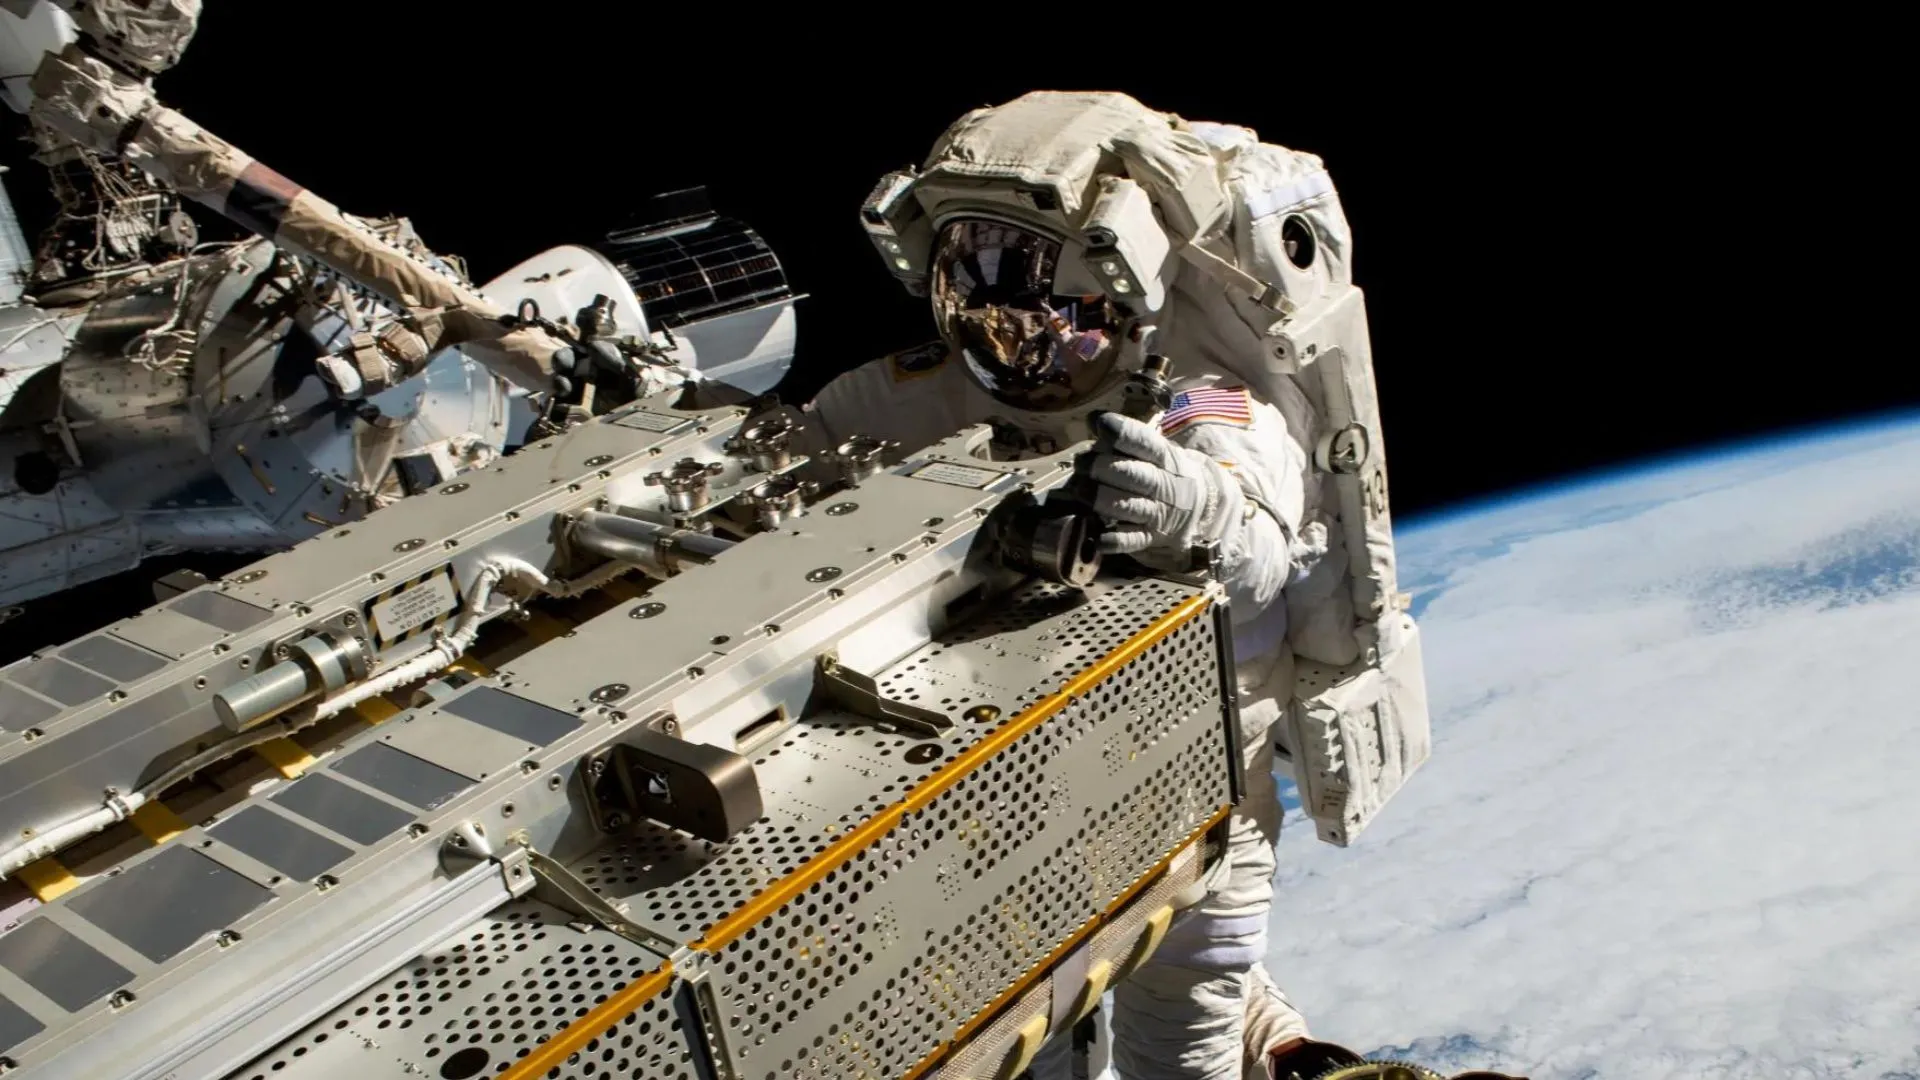 Astroforensics: Here’s How Scientists Prepare For Possible Space Crimes